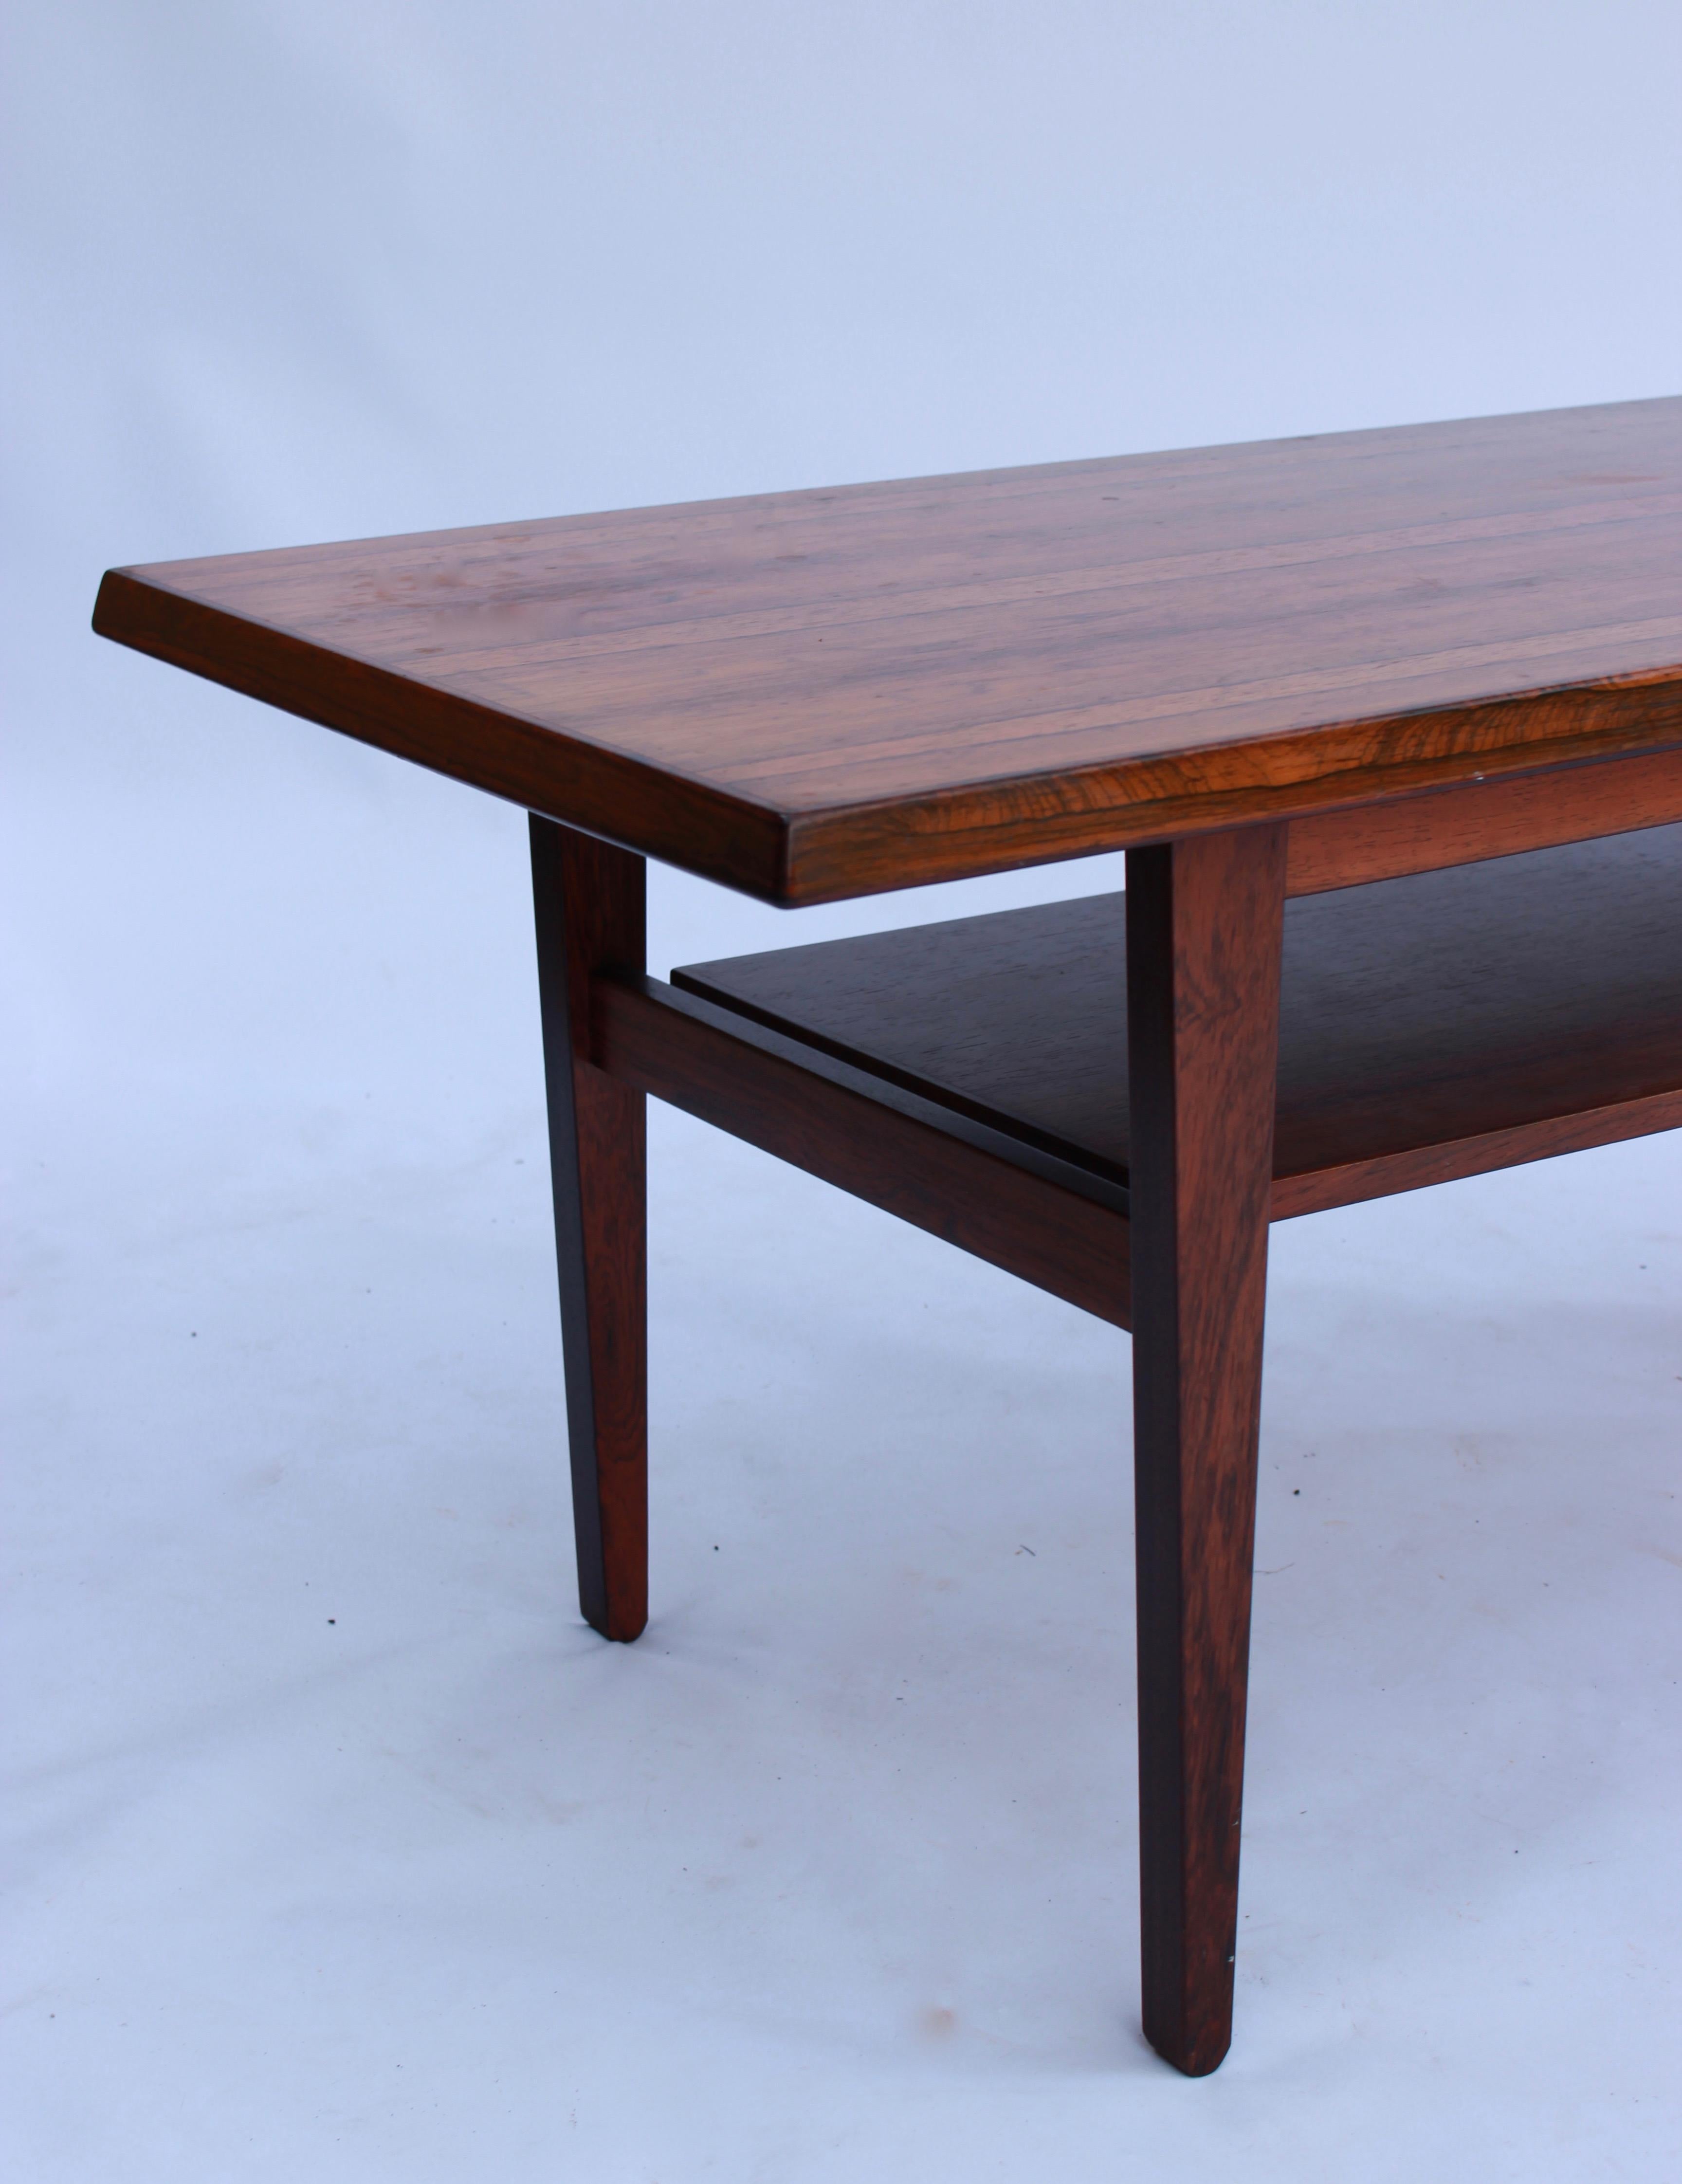 Coffee Table in Rosewood of Danish Design from the 1960s For Sale 2